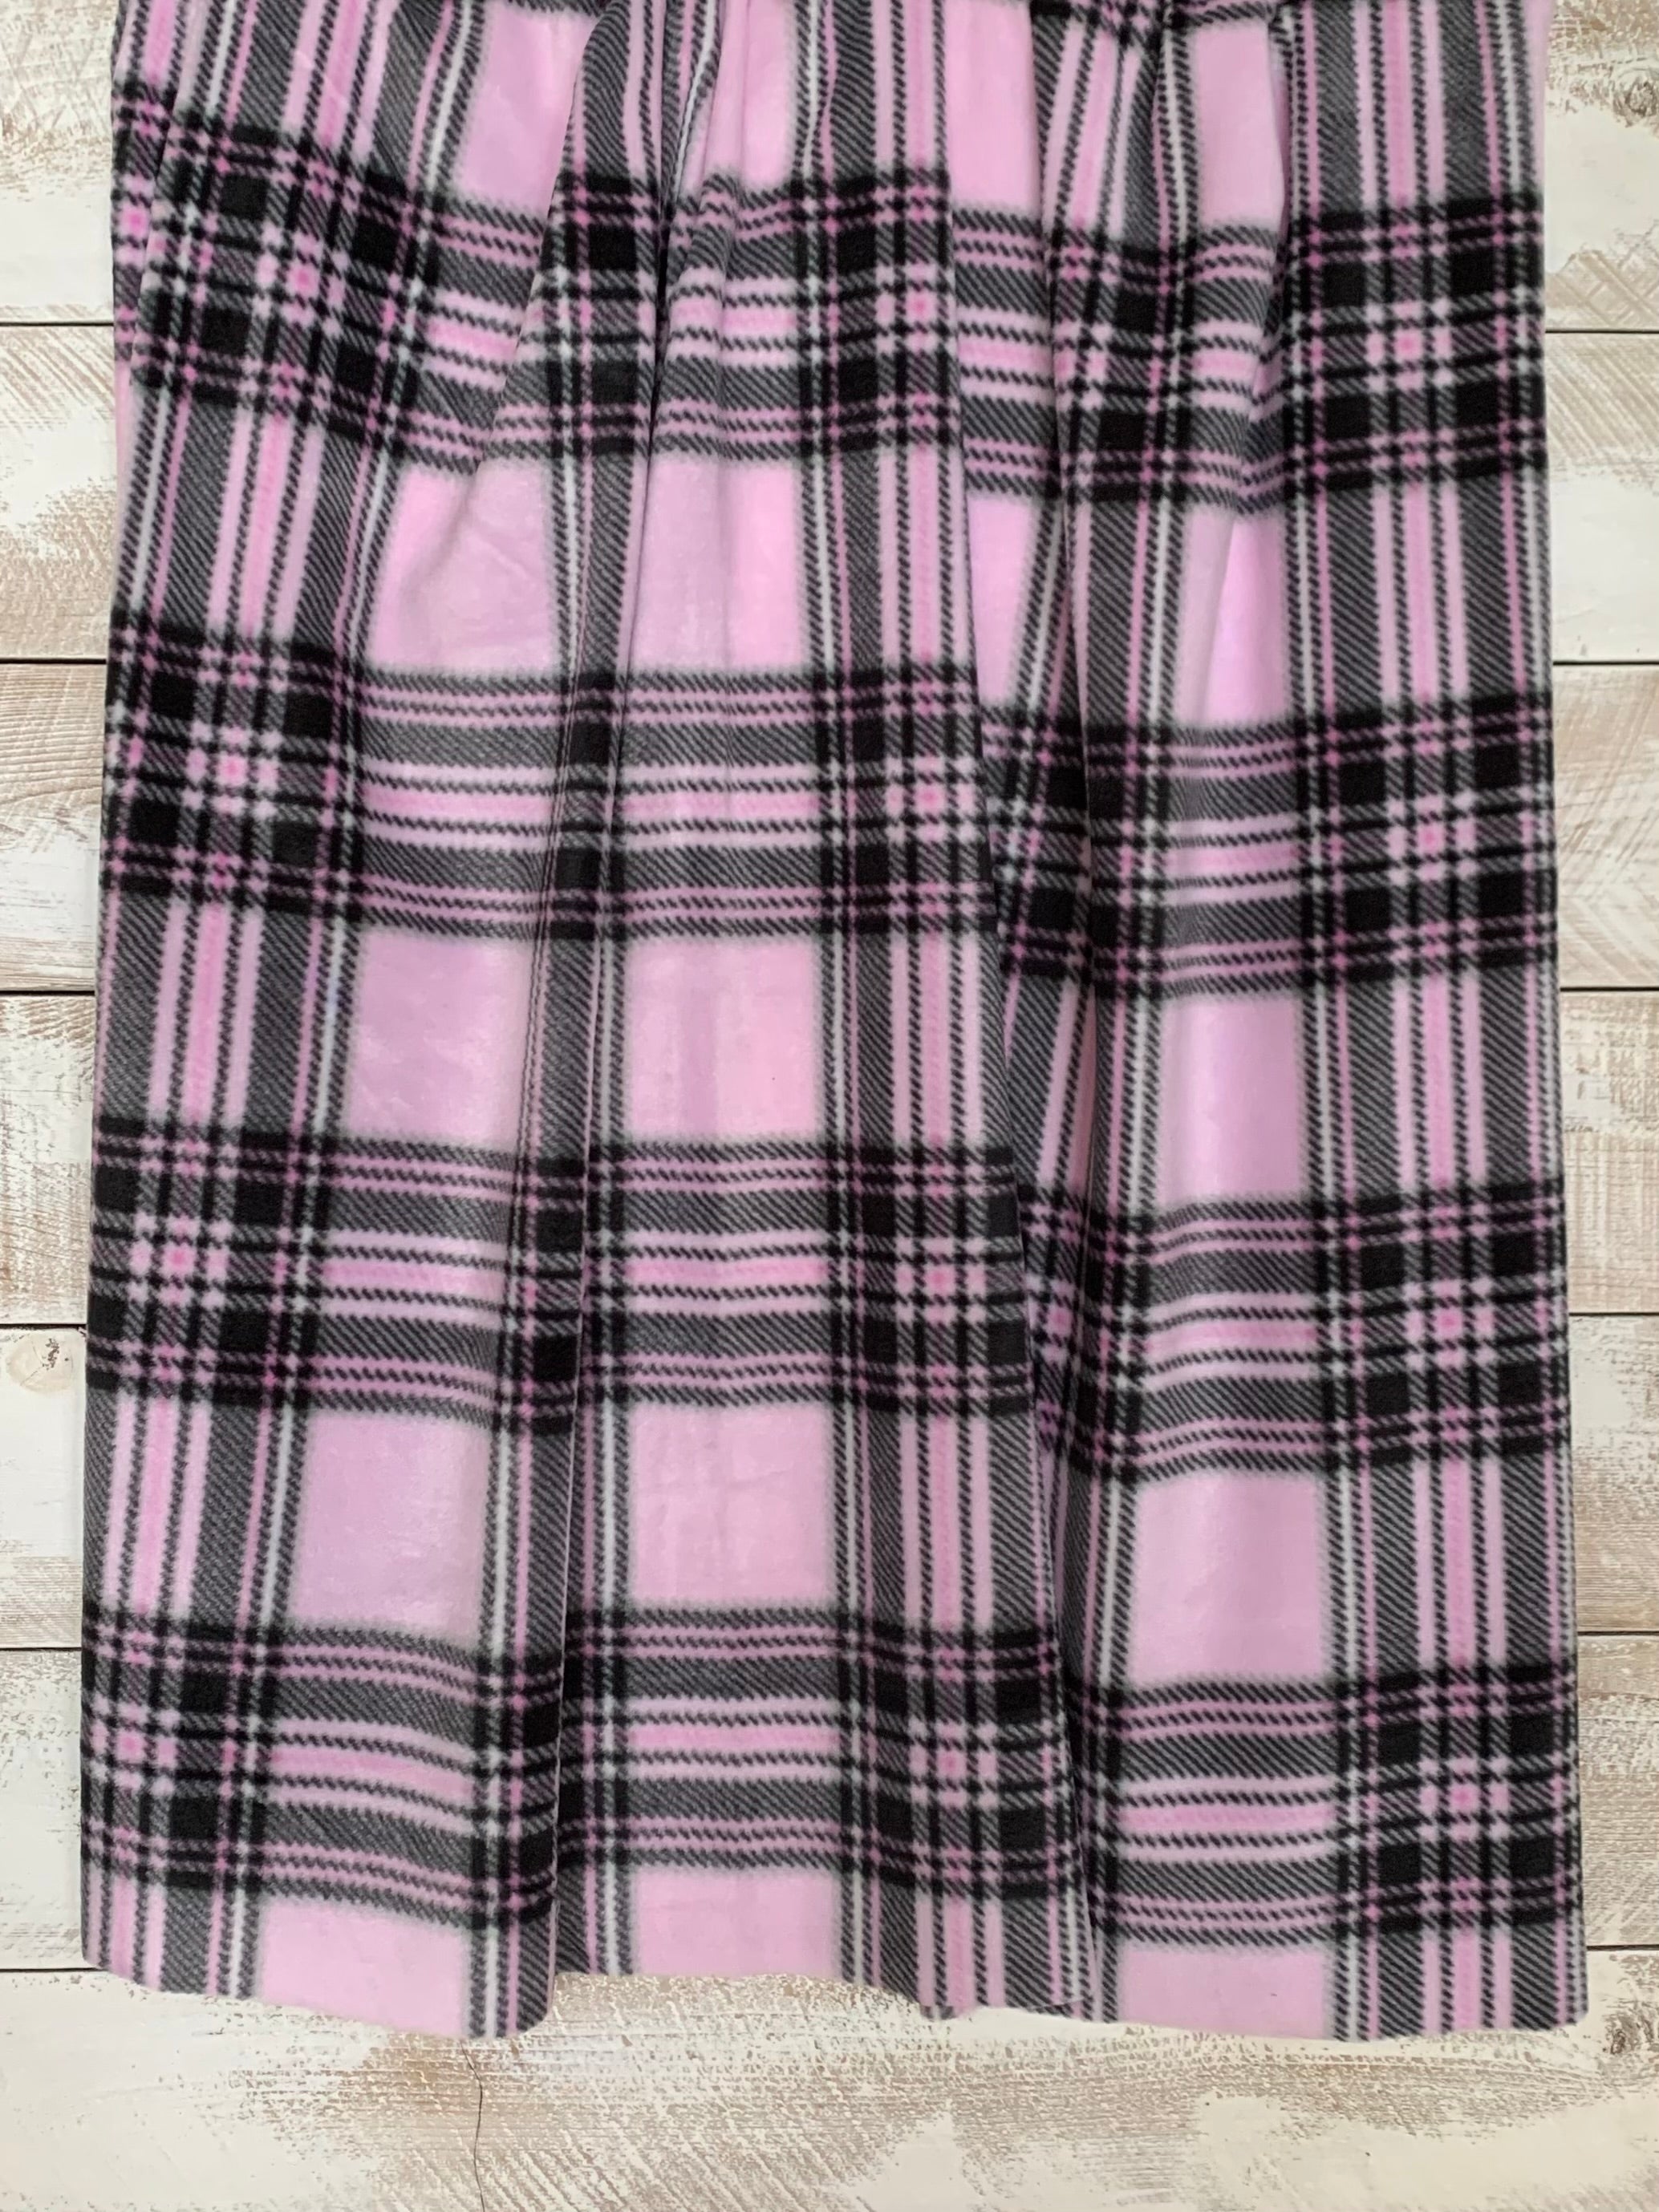 No Sew Blanket Kit - Black and Pink Plaid - Personalization Available